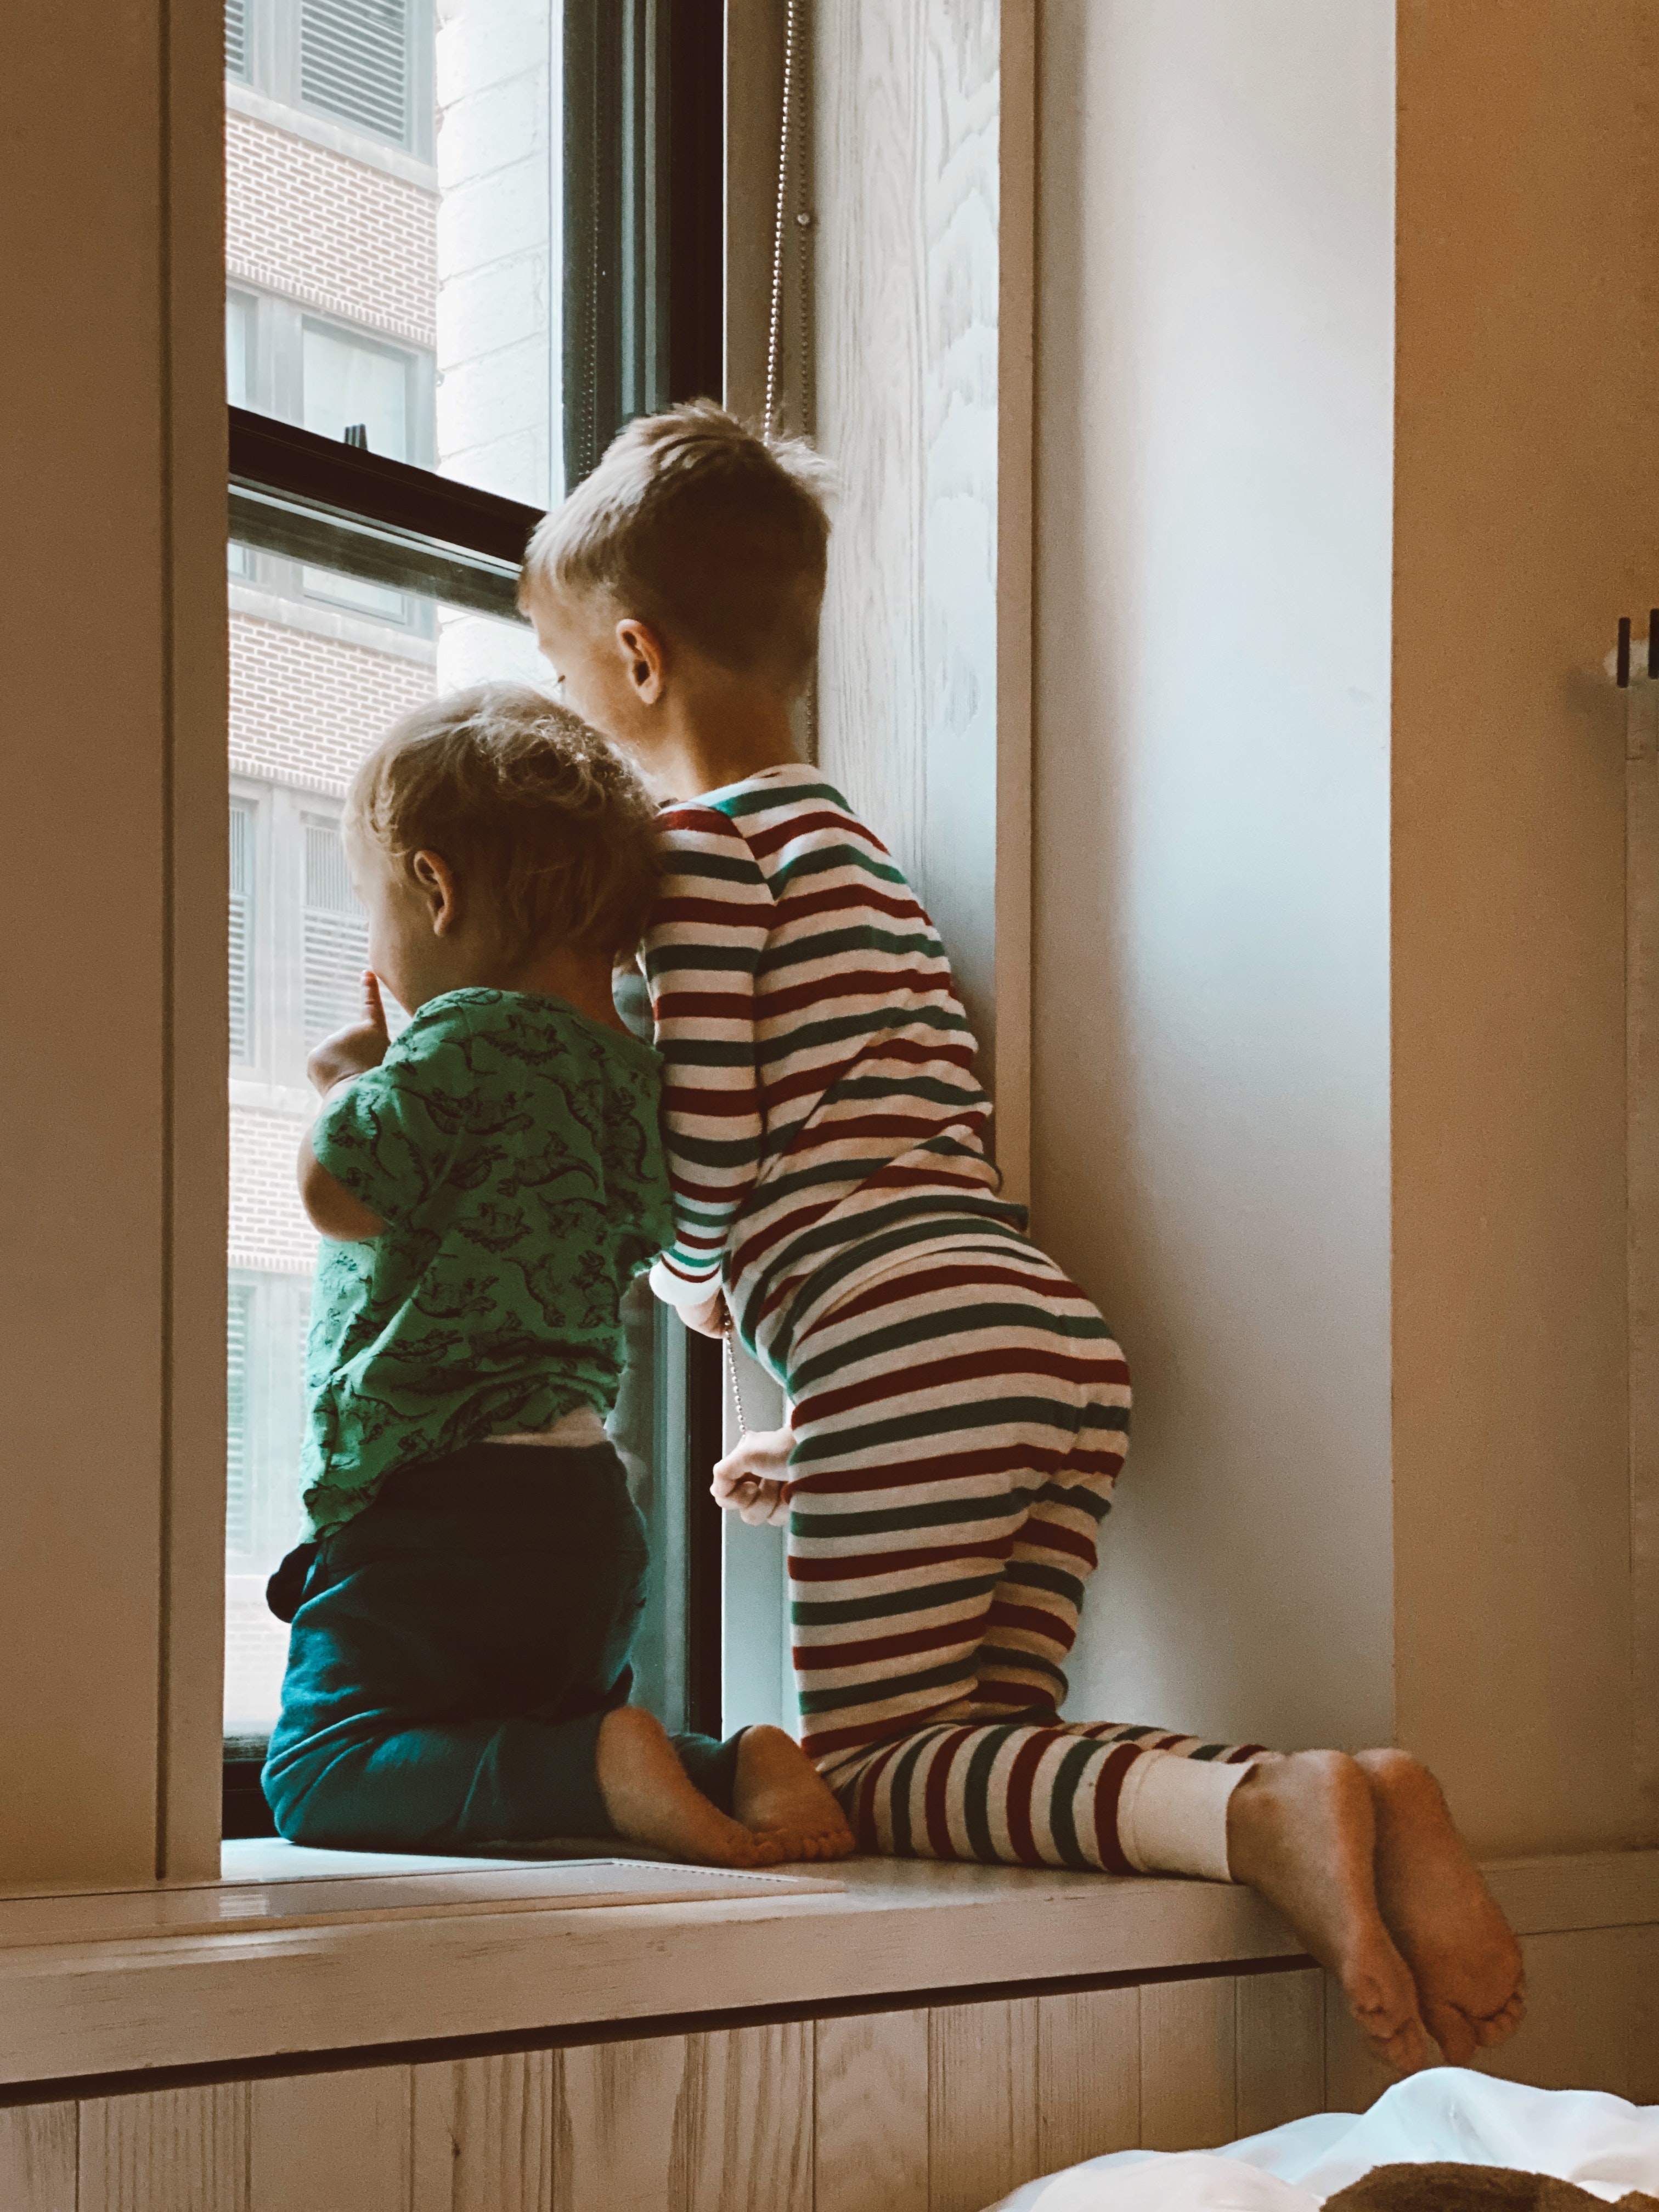 Two kids looking out the window | Source: Pexels